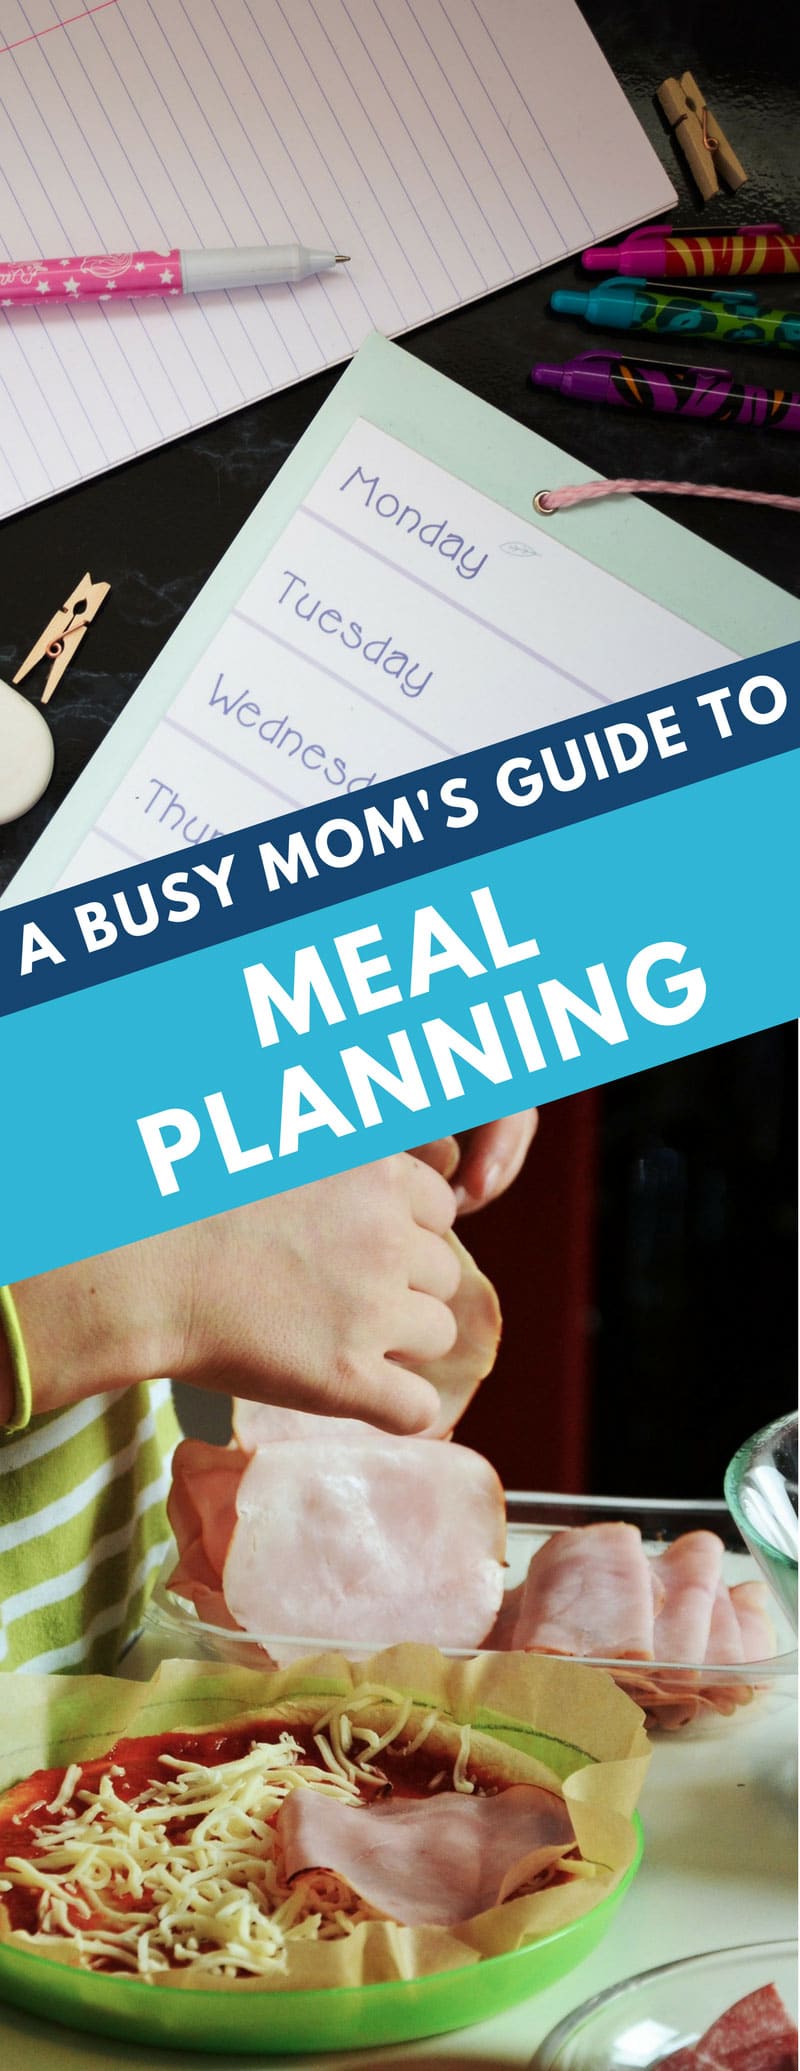 Meal Planning for Busy Moms 